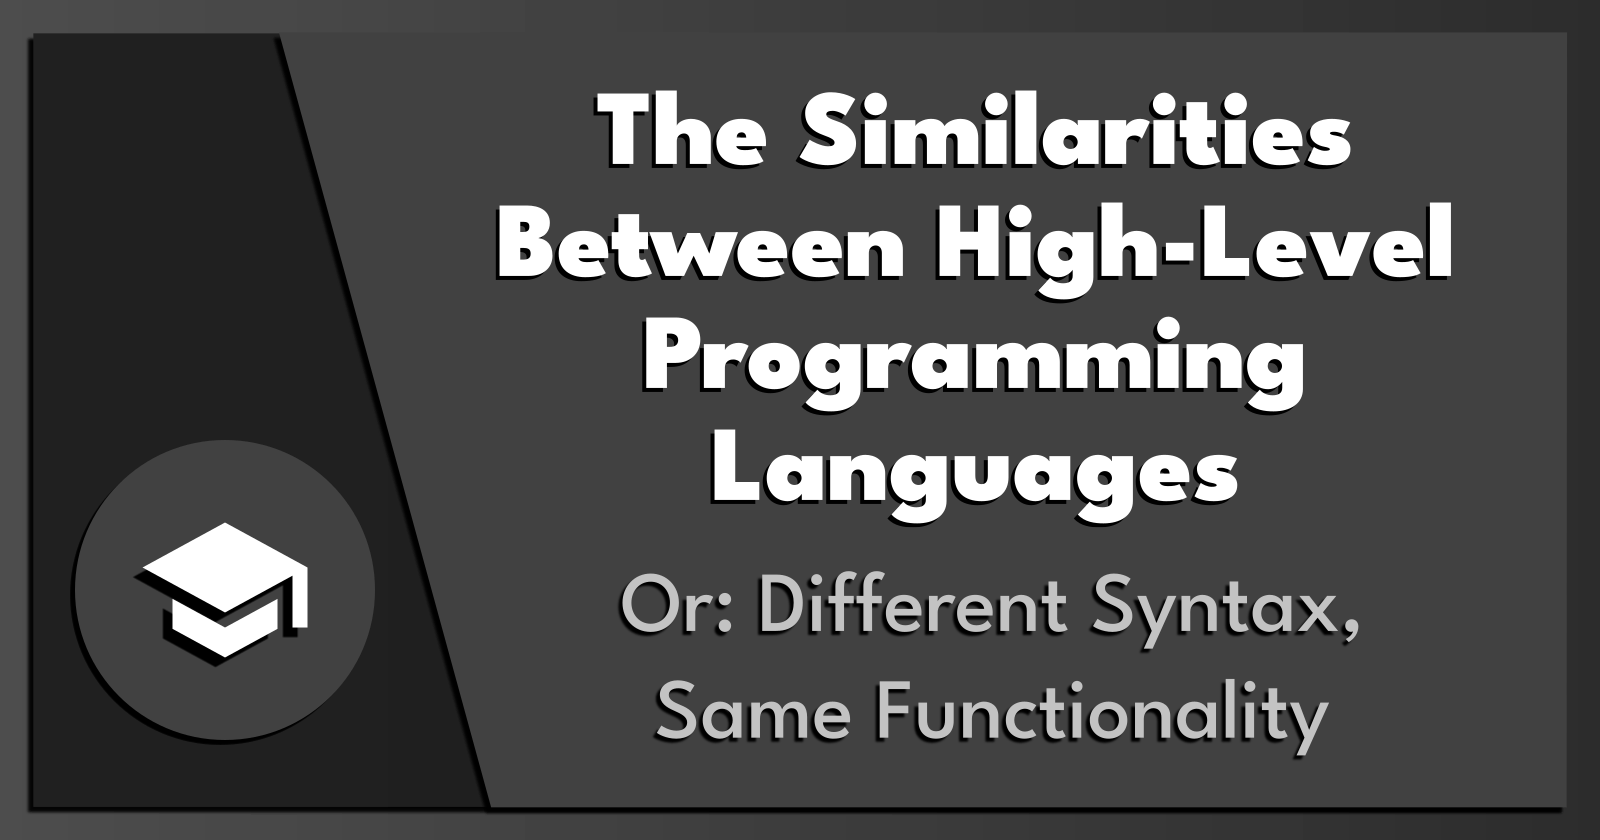 The Similarities Between High-Level Programming Languages.